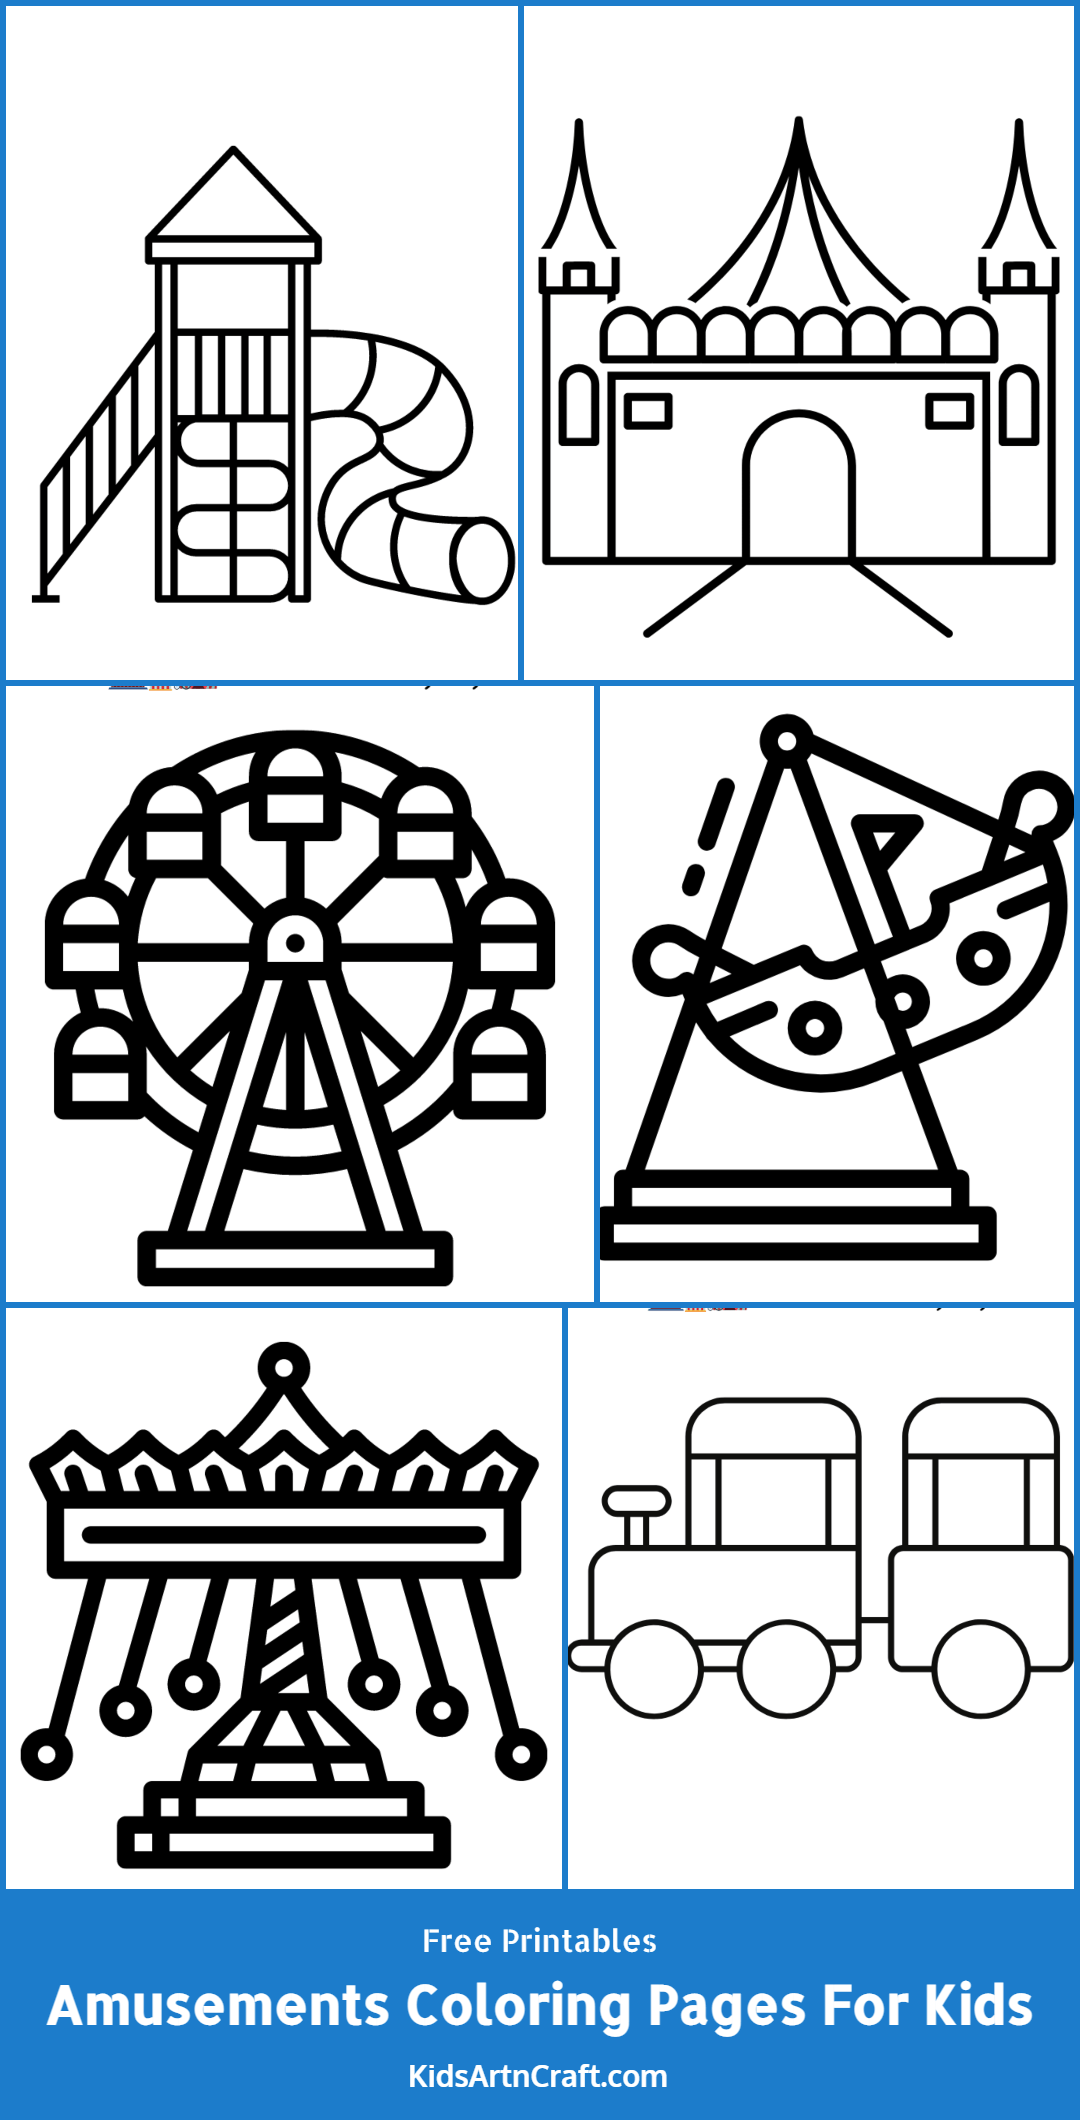 Amusements Parks Coloring Pages For Kids – Free Printables